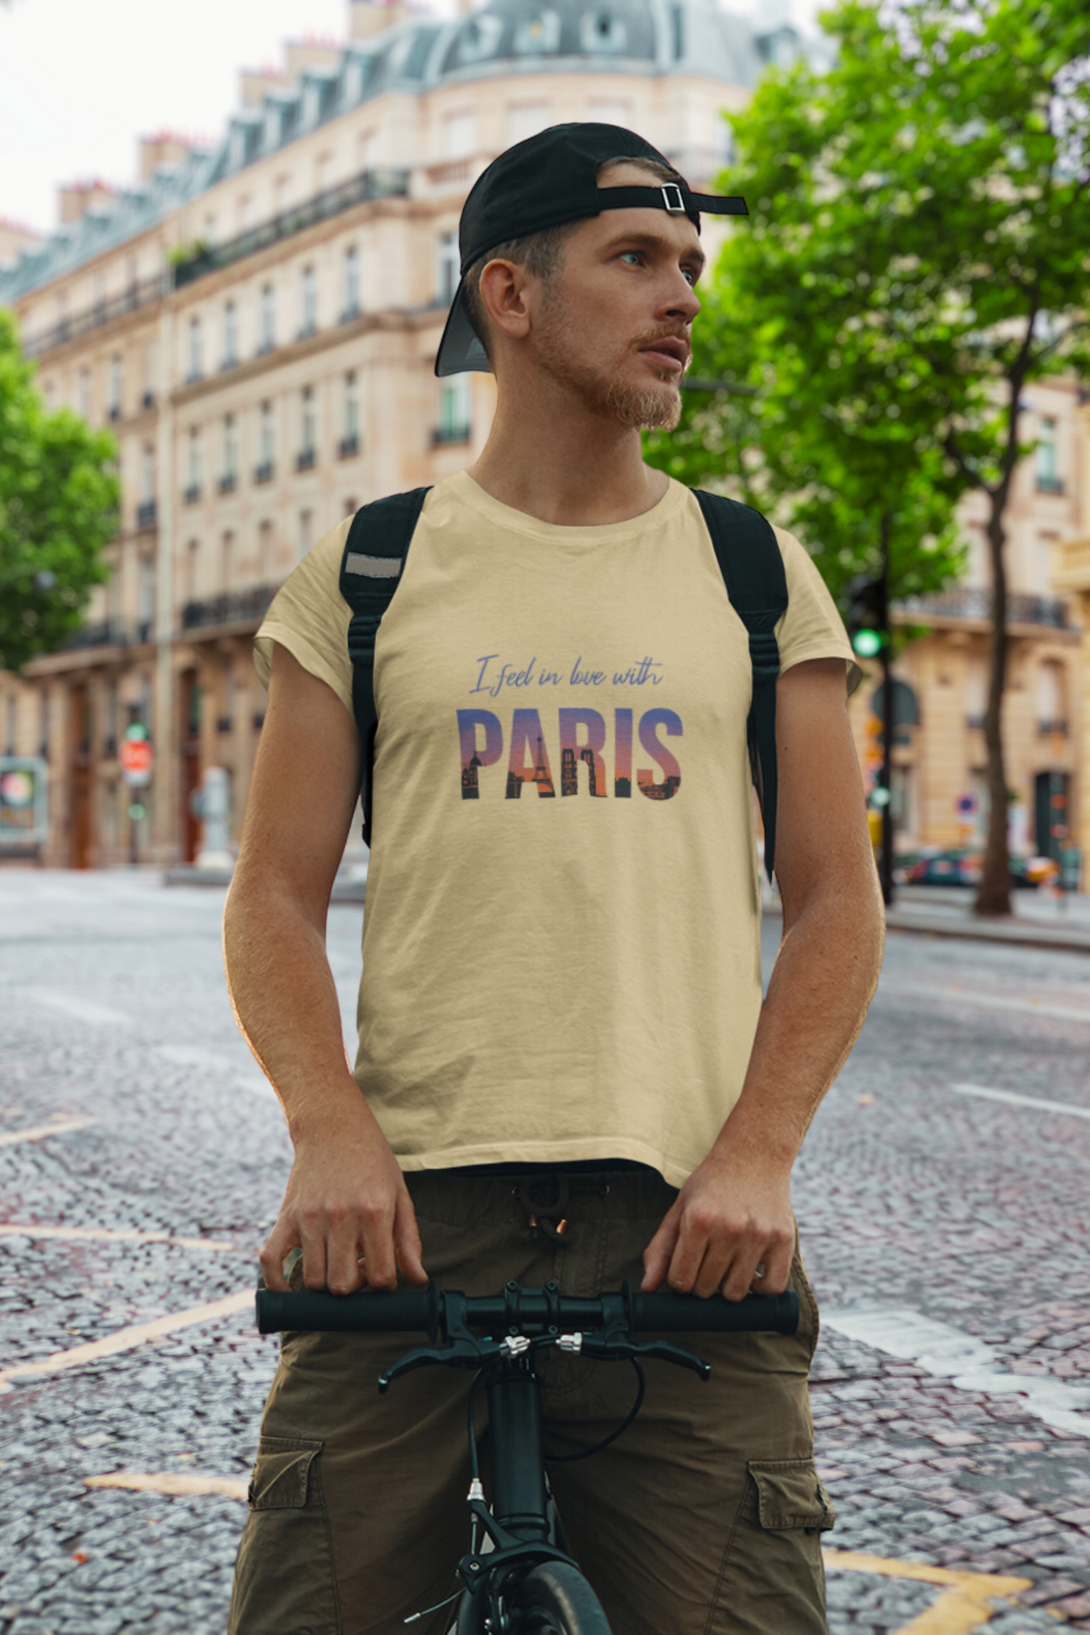 In Love With Paris Printed T-Shirt For Men - WowWaves - 6